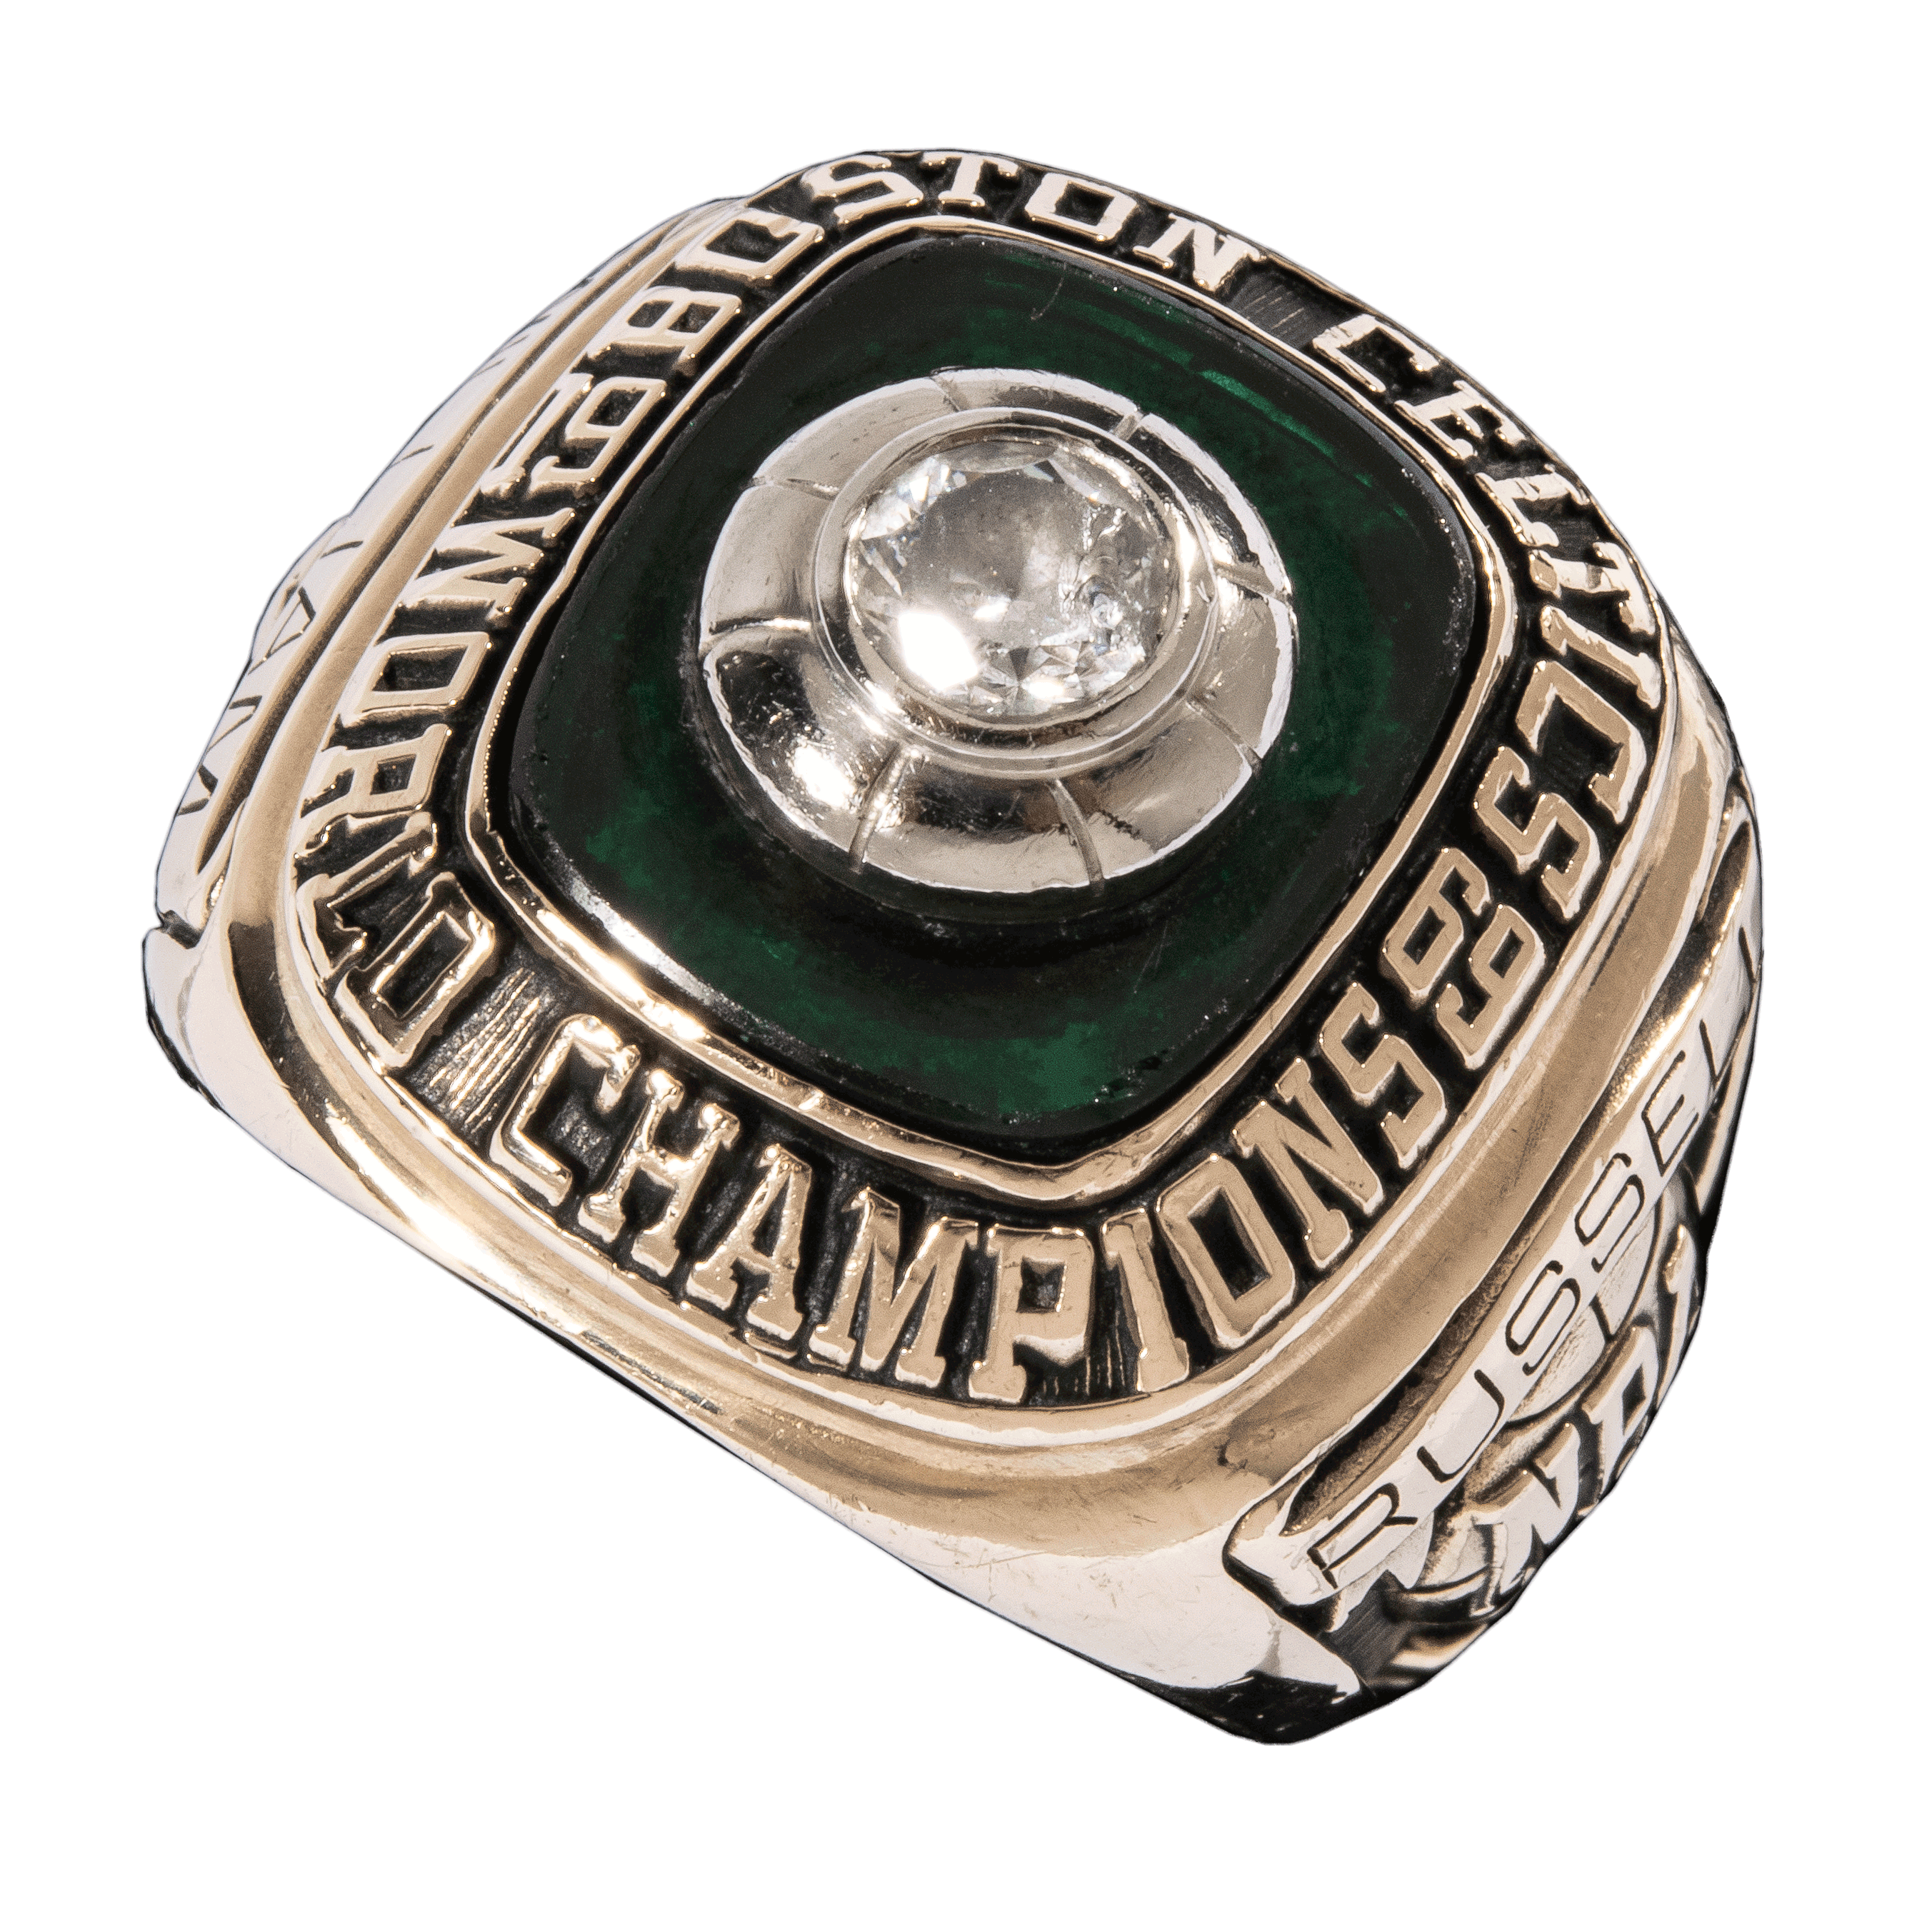 Bill Russell 1975 Basketball Hall of Fame Ring Up For Auction